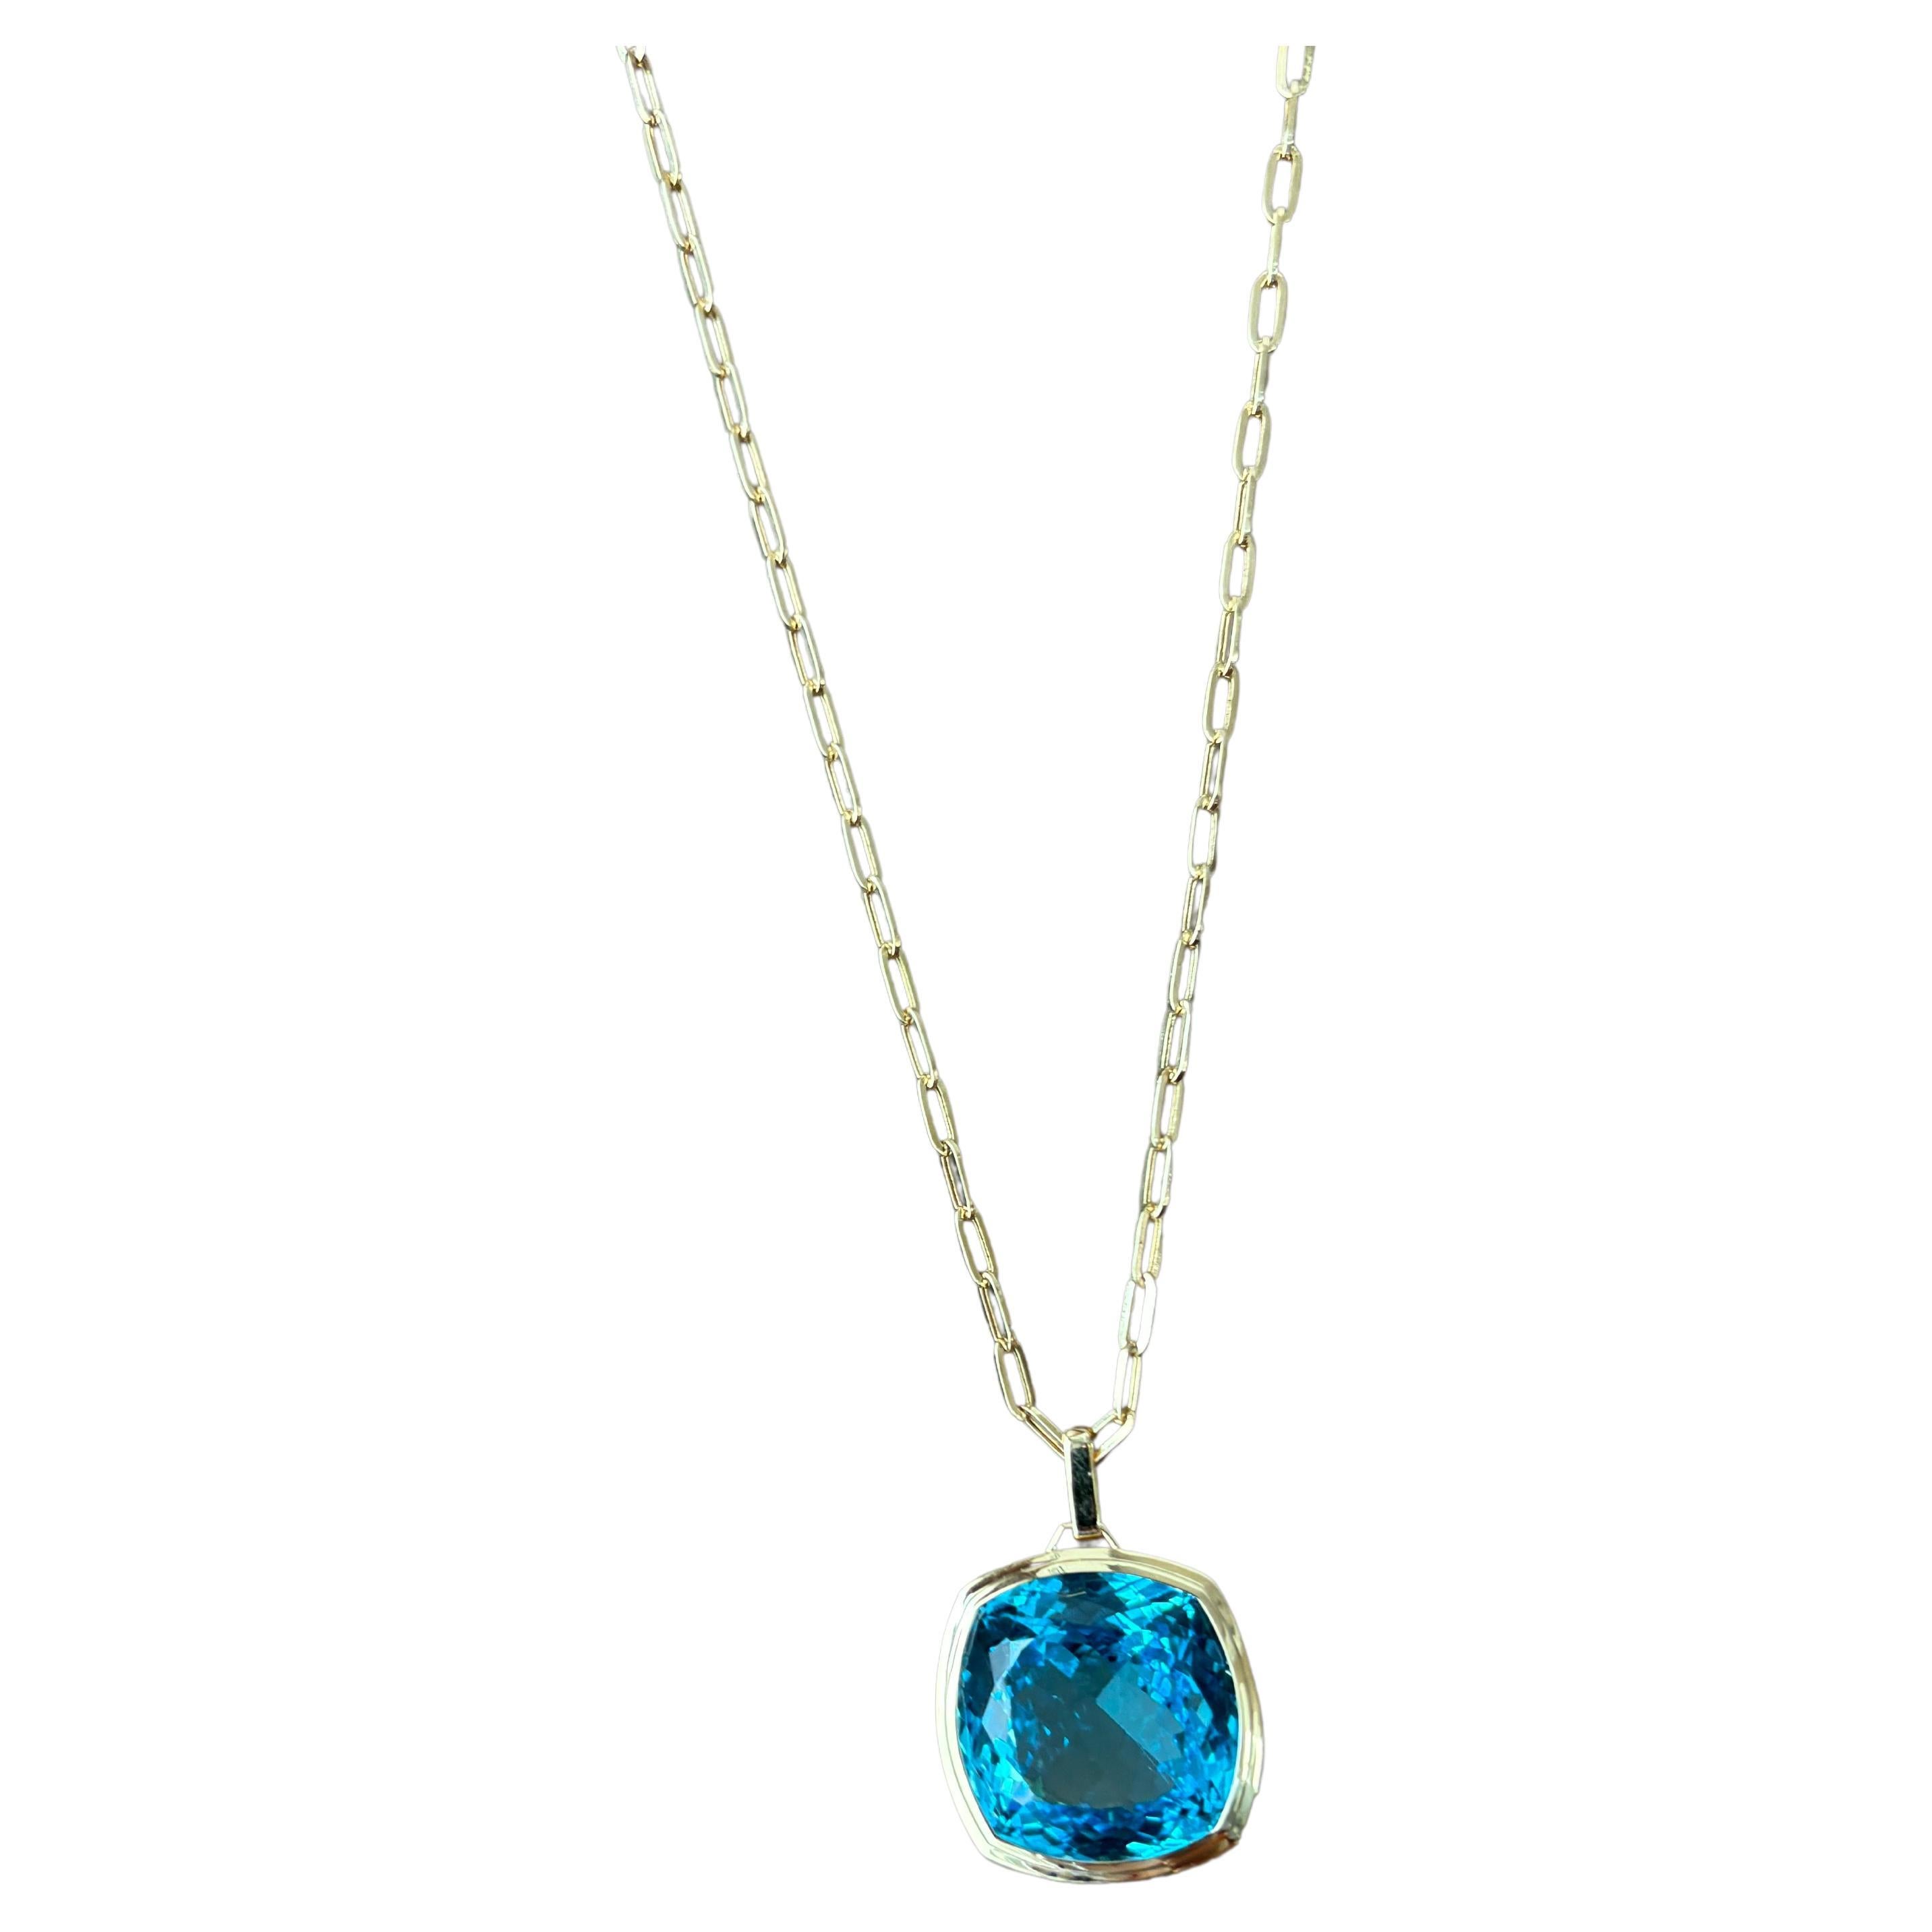 82.46 Carat Blue Topaz Pendant Necklace with Link Chain